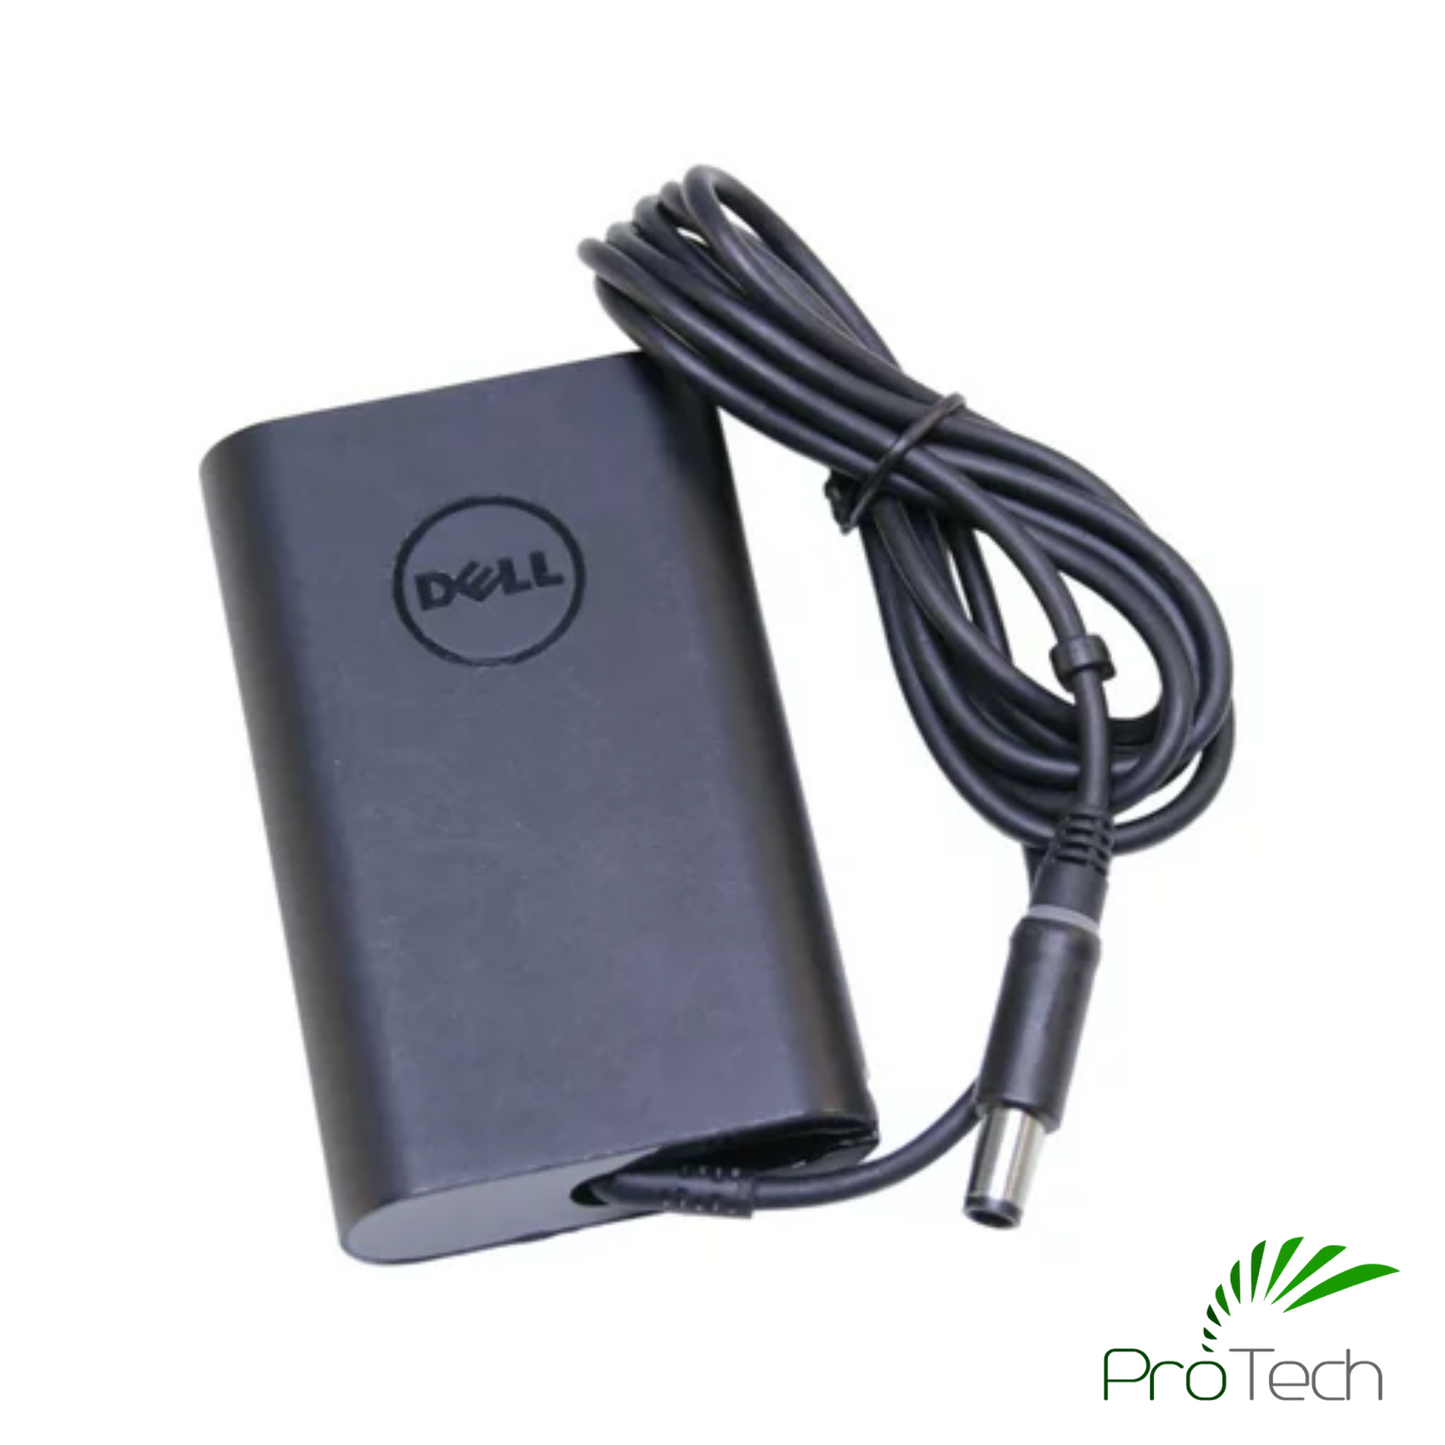 Dell Chargers | Assorted